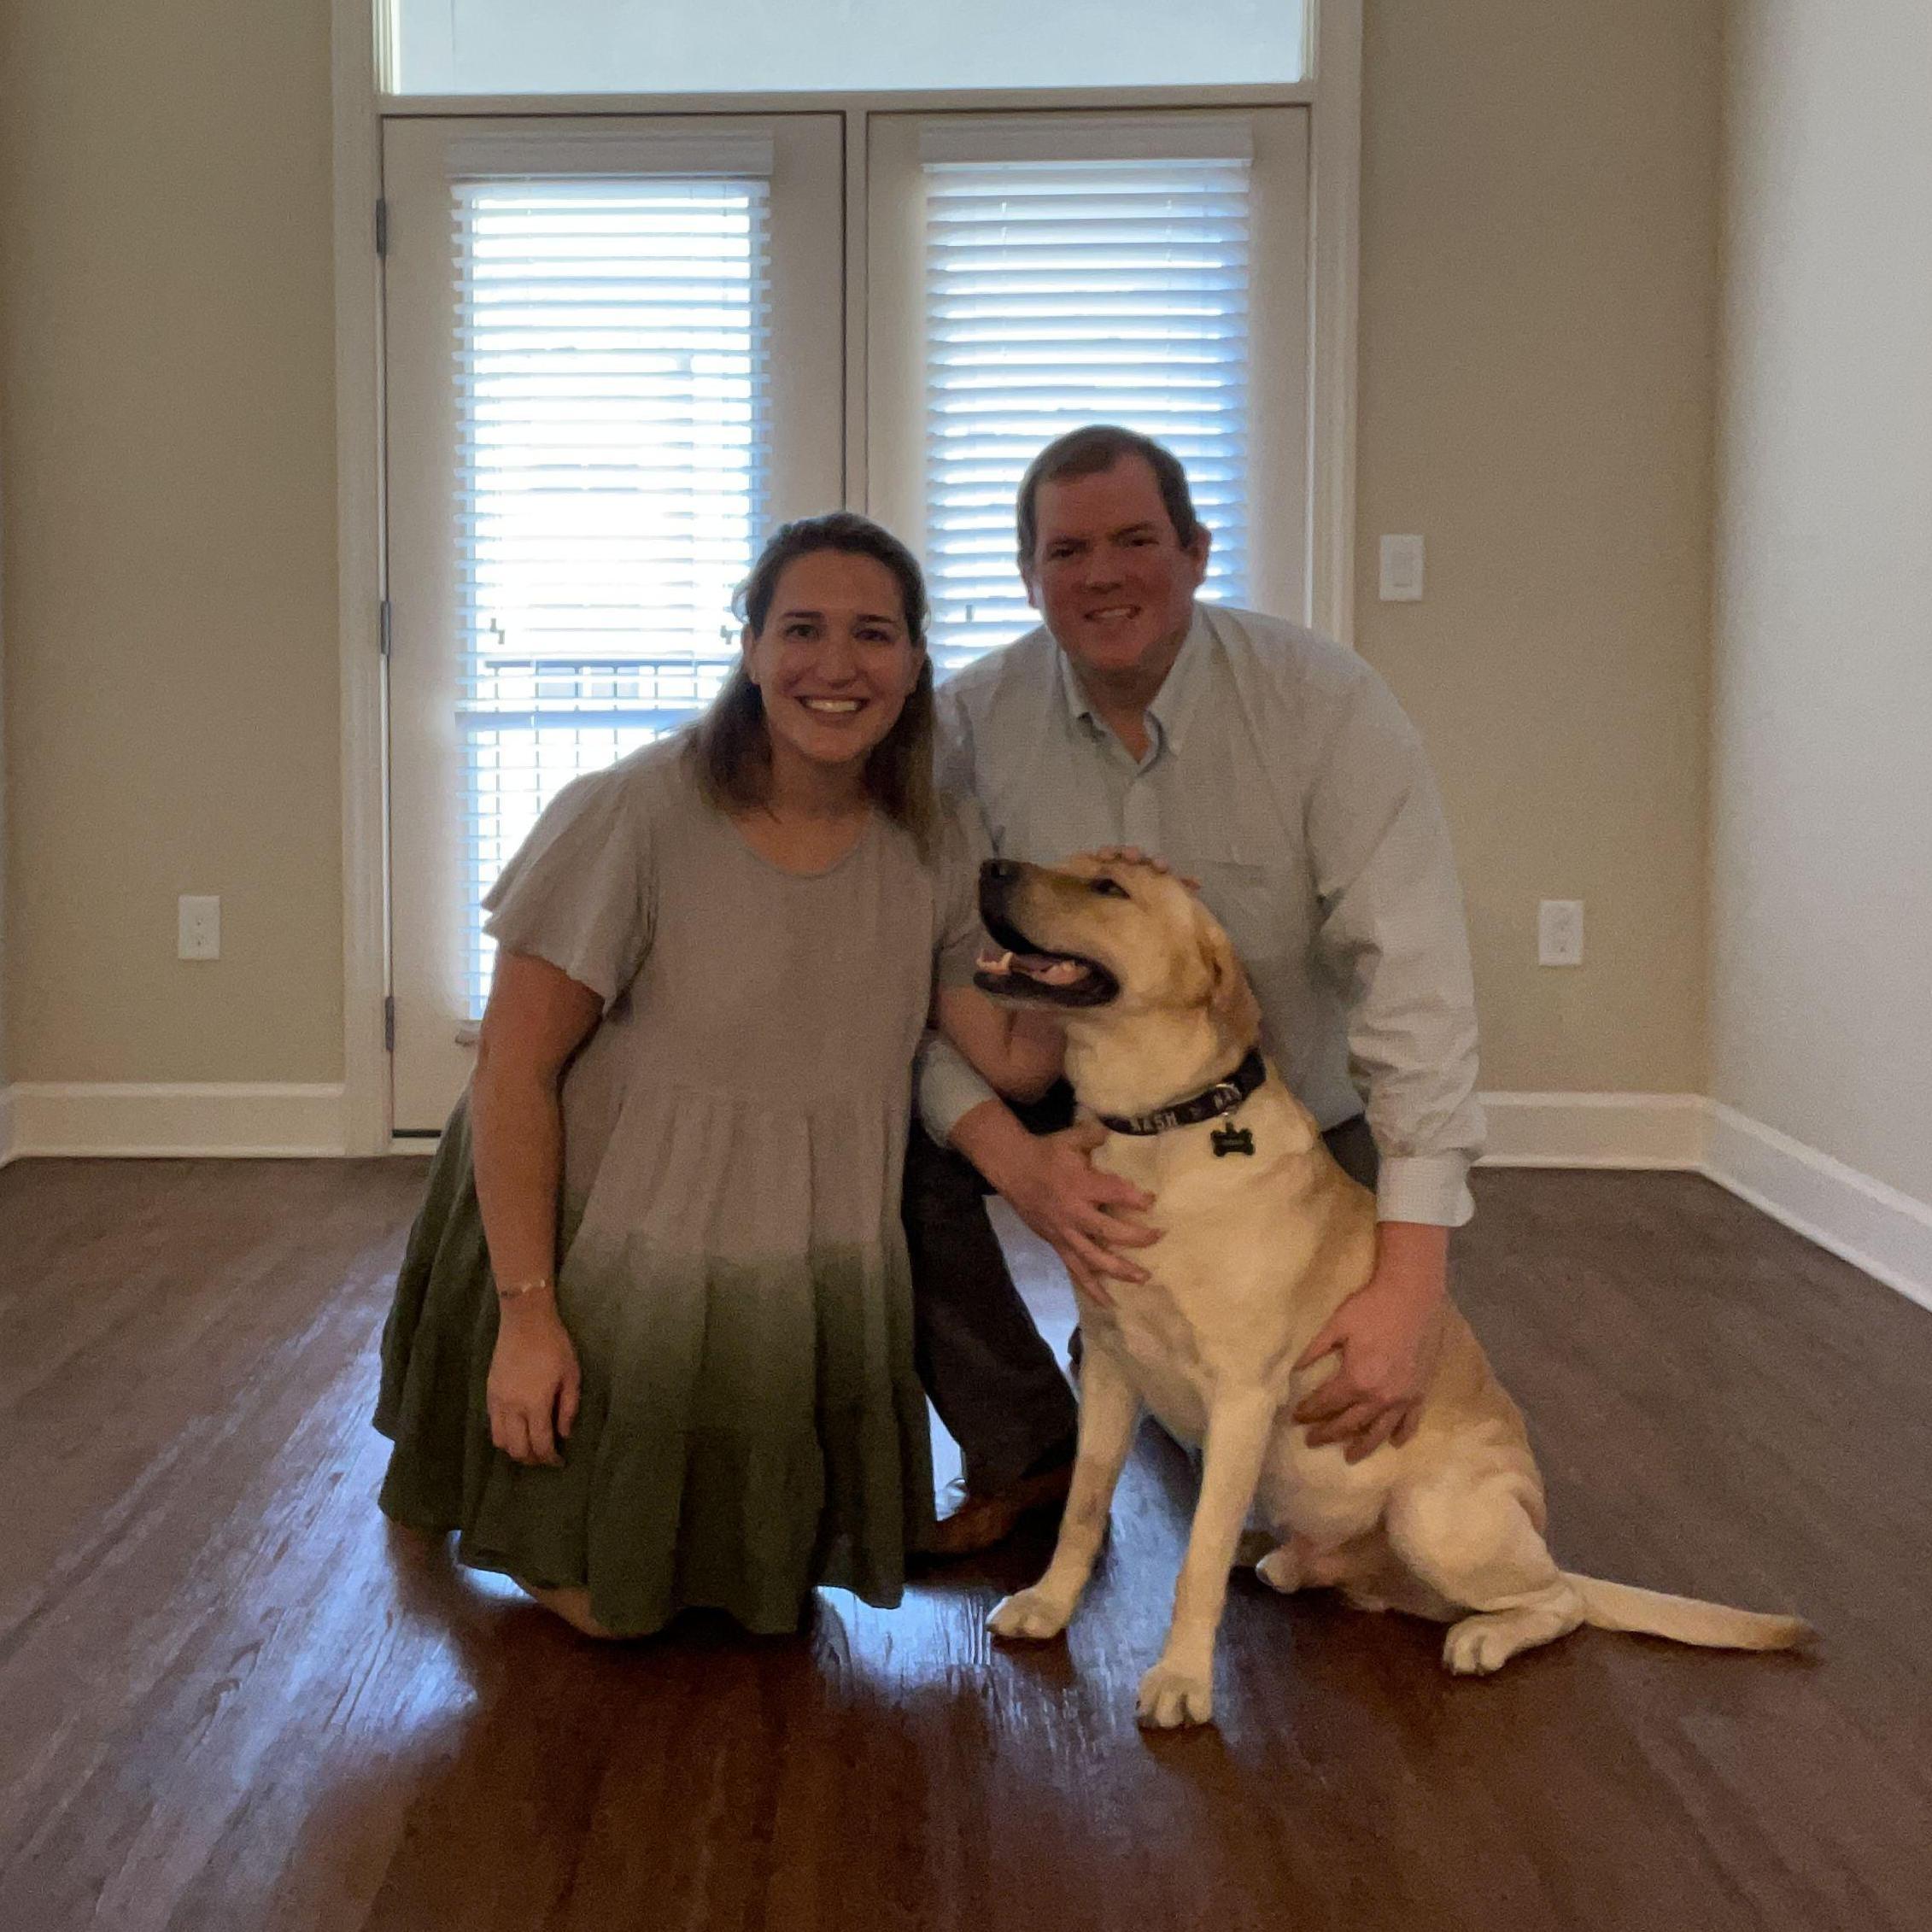 Our first apartment together in Nashville featuring Gunnar!